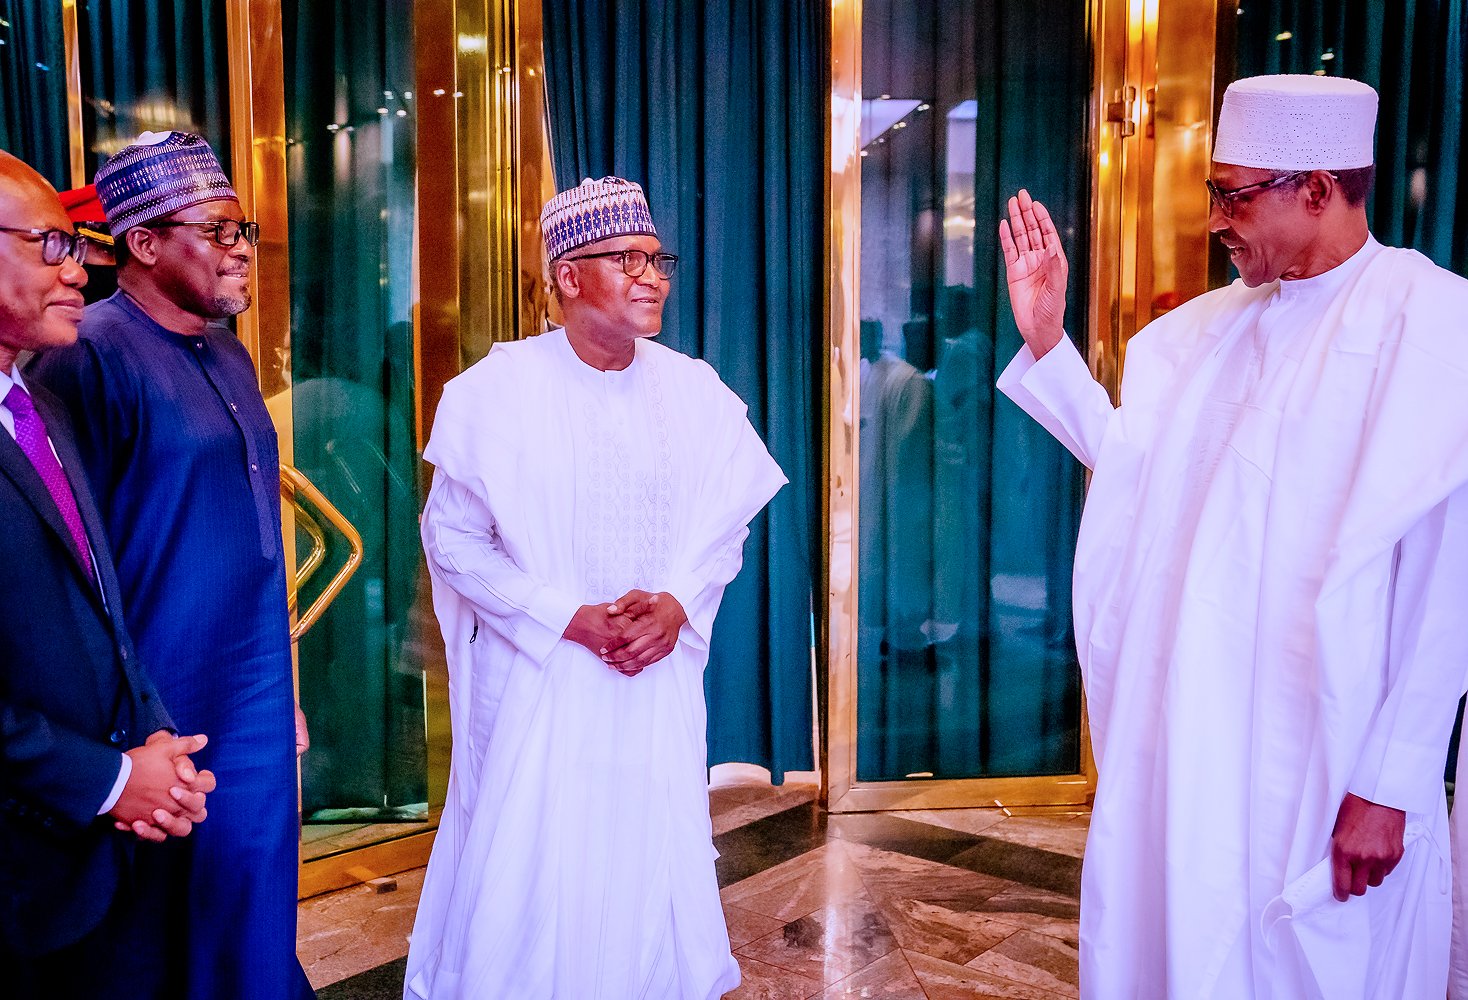 We’re tackling challenges undermining business, investments, Buhari tells Dangote group